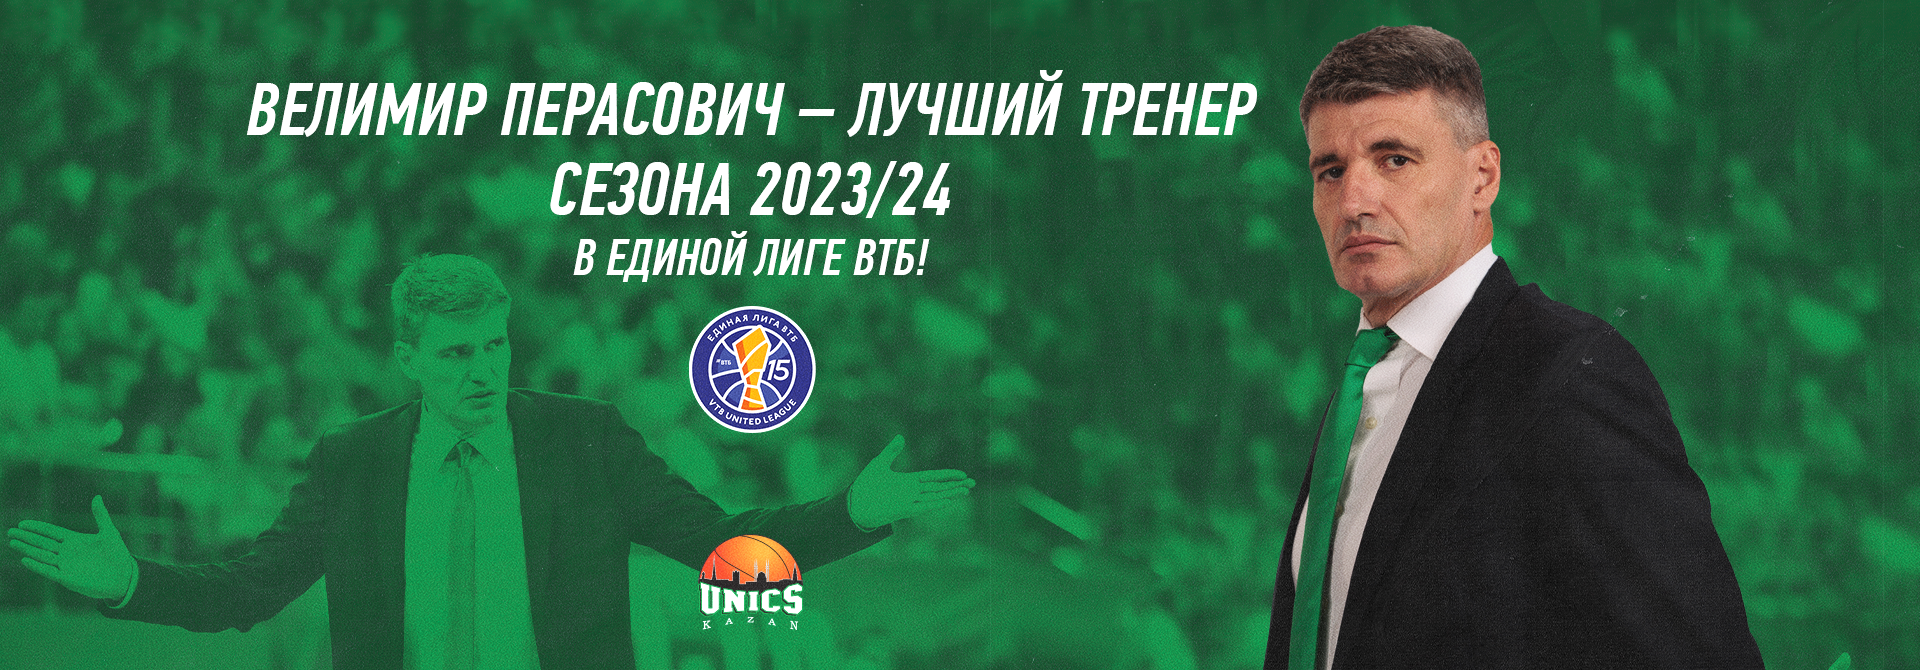 Velimir Perasovic is the best coach of the 2023/24 season in the VTB United League!